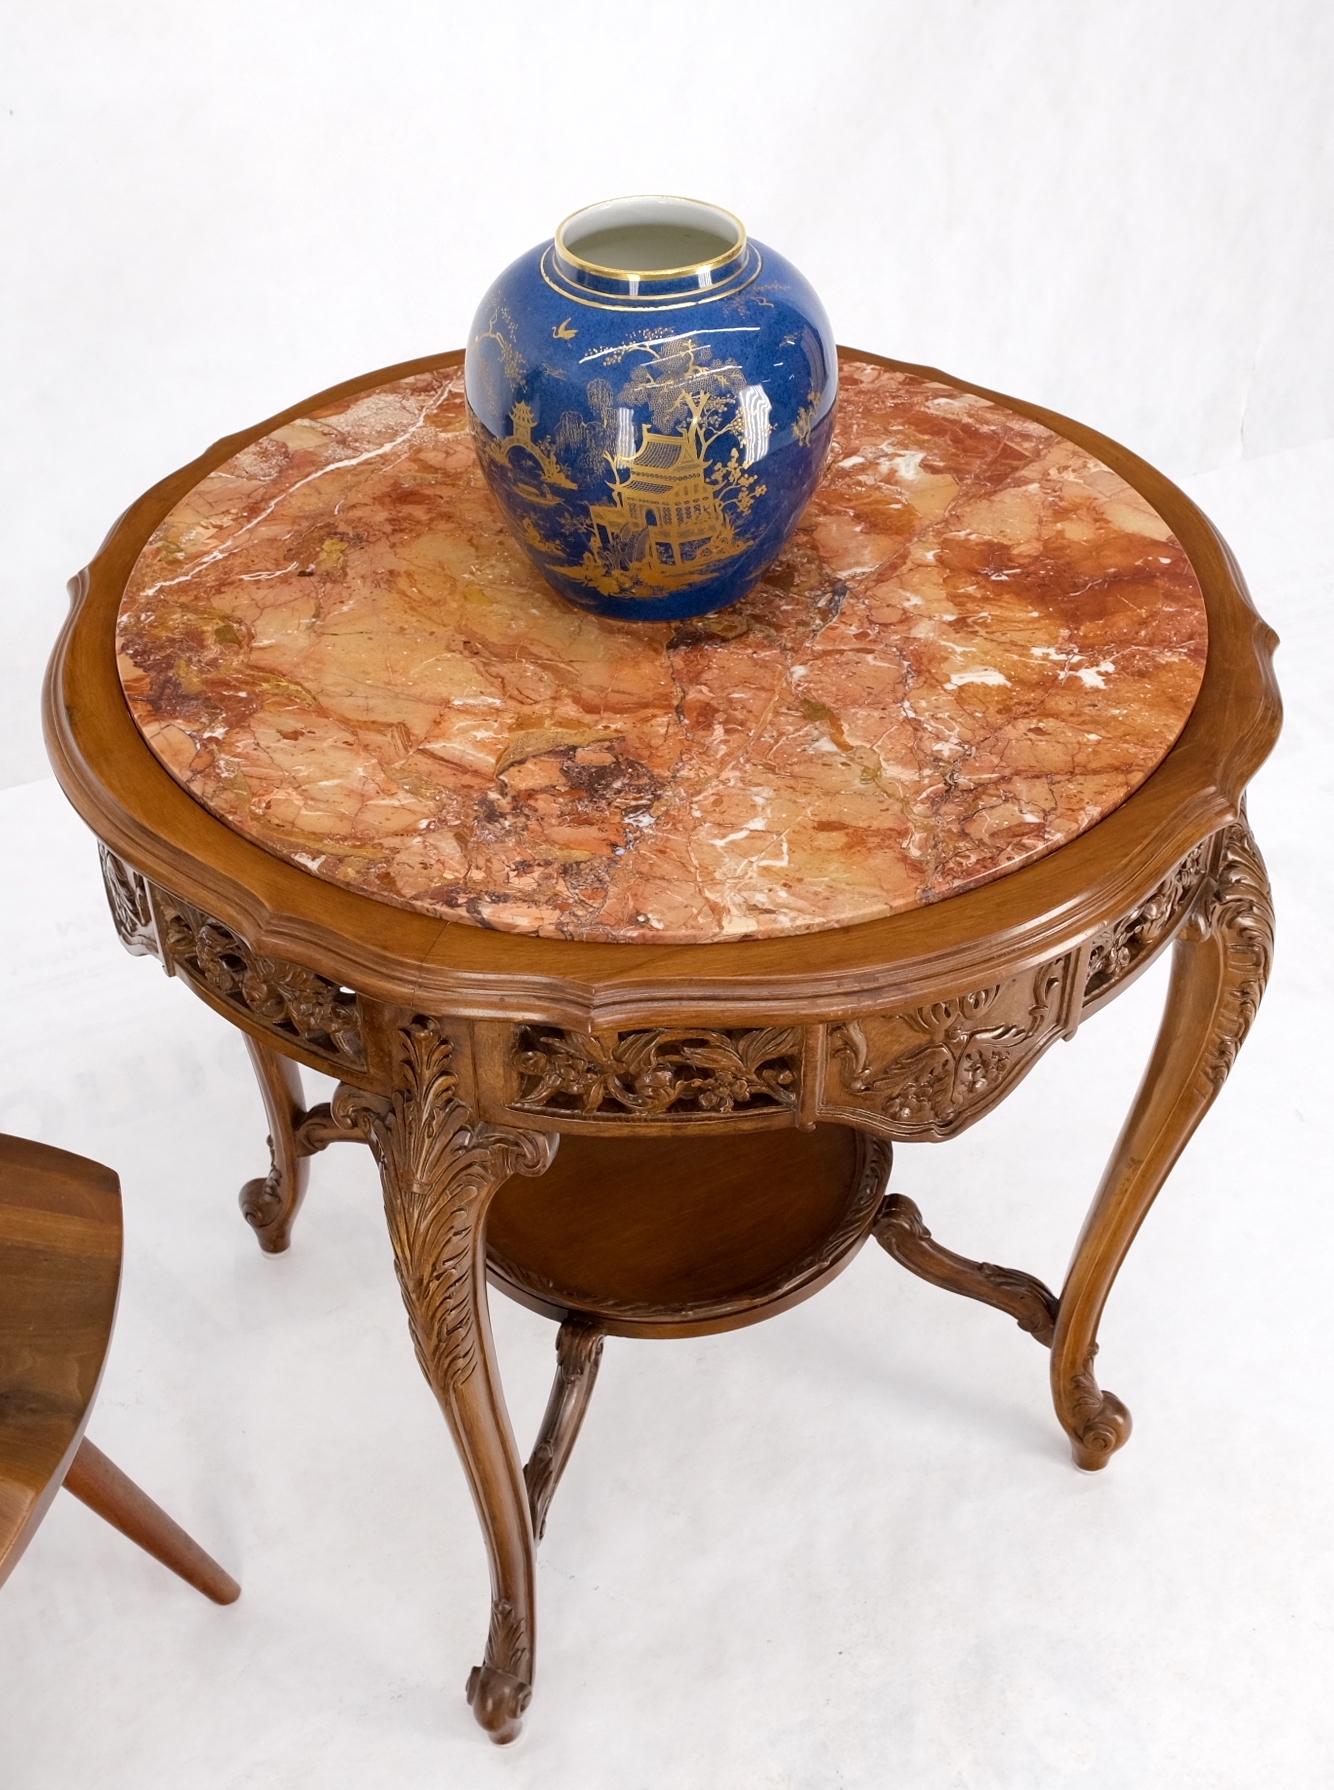 Carved walnut rouge marble top lamp side occasional table stand pedestal.